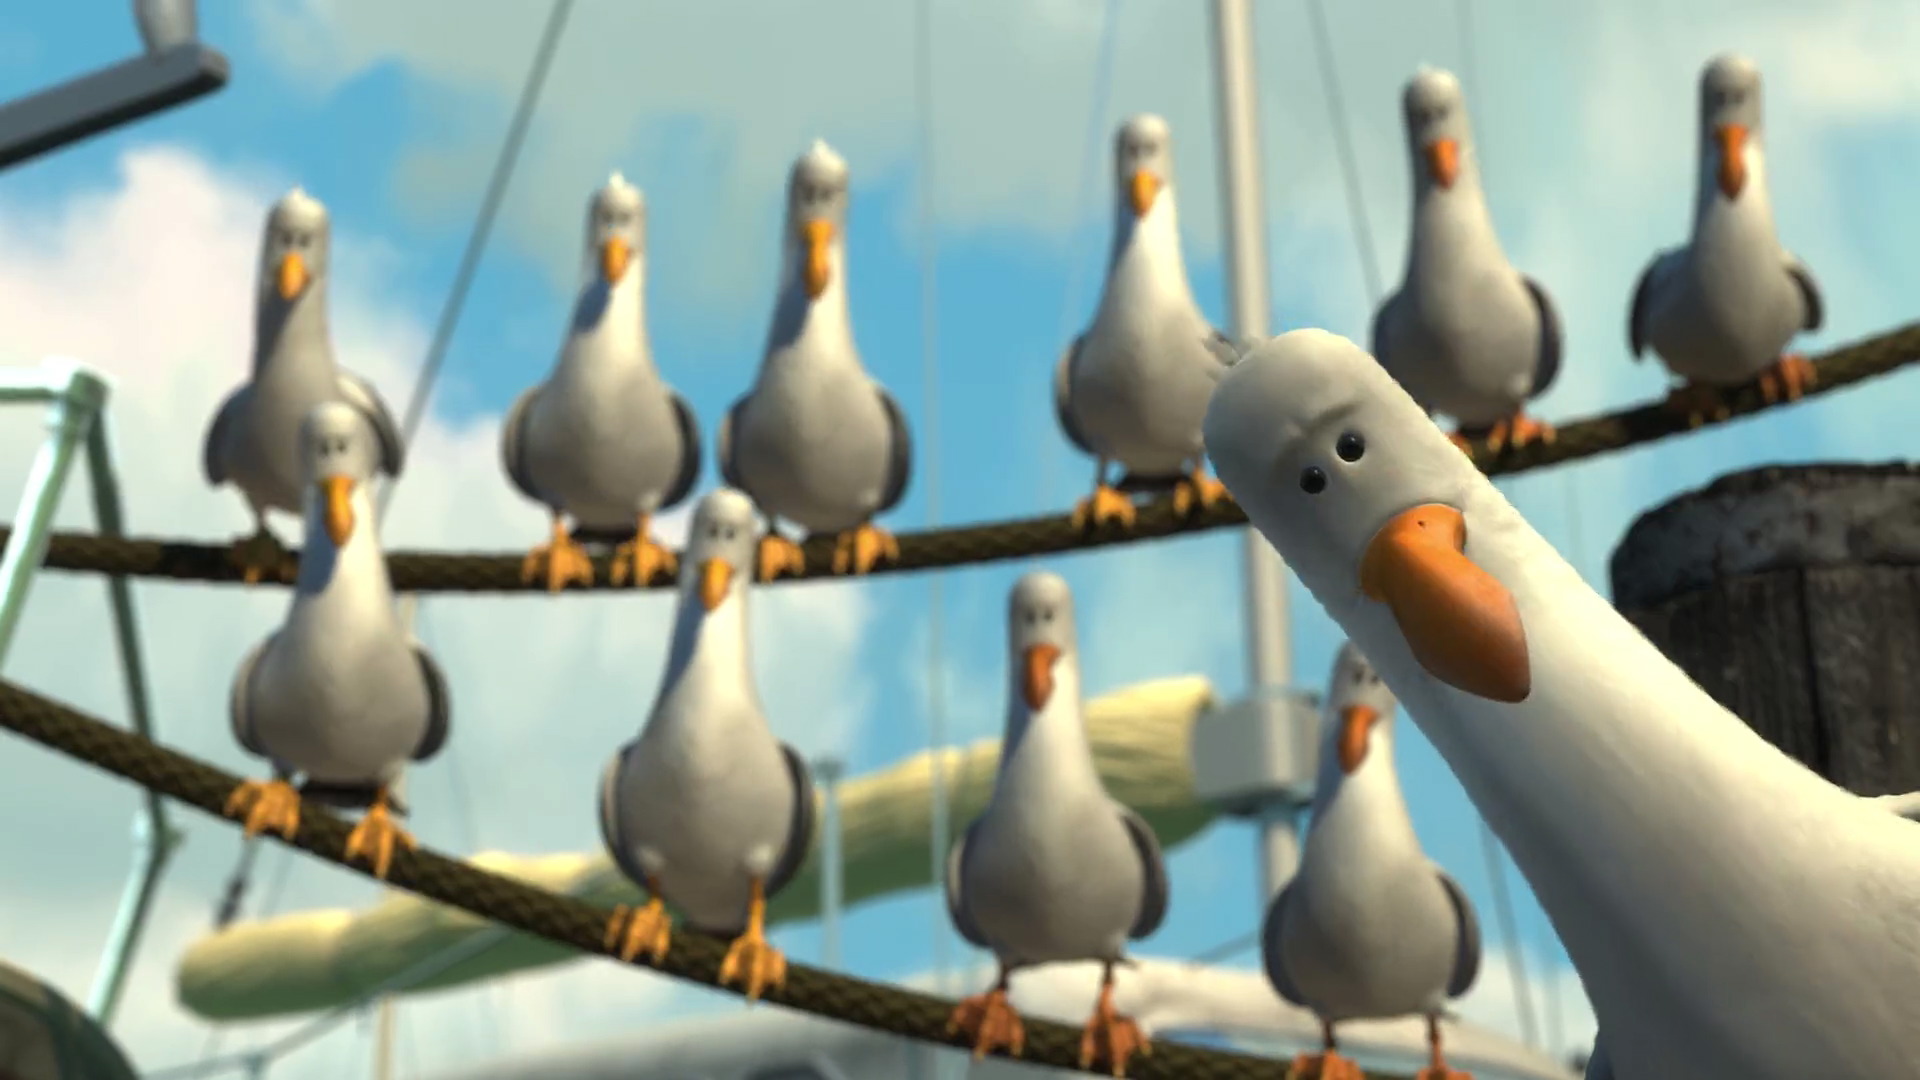 Mine? seagulls from Finding Nemo